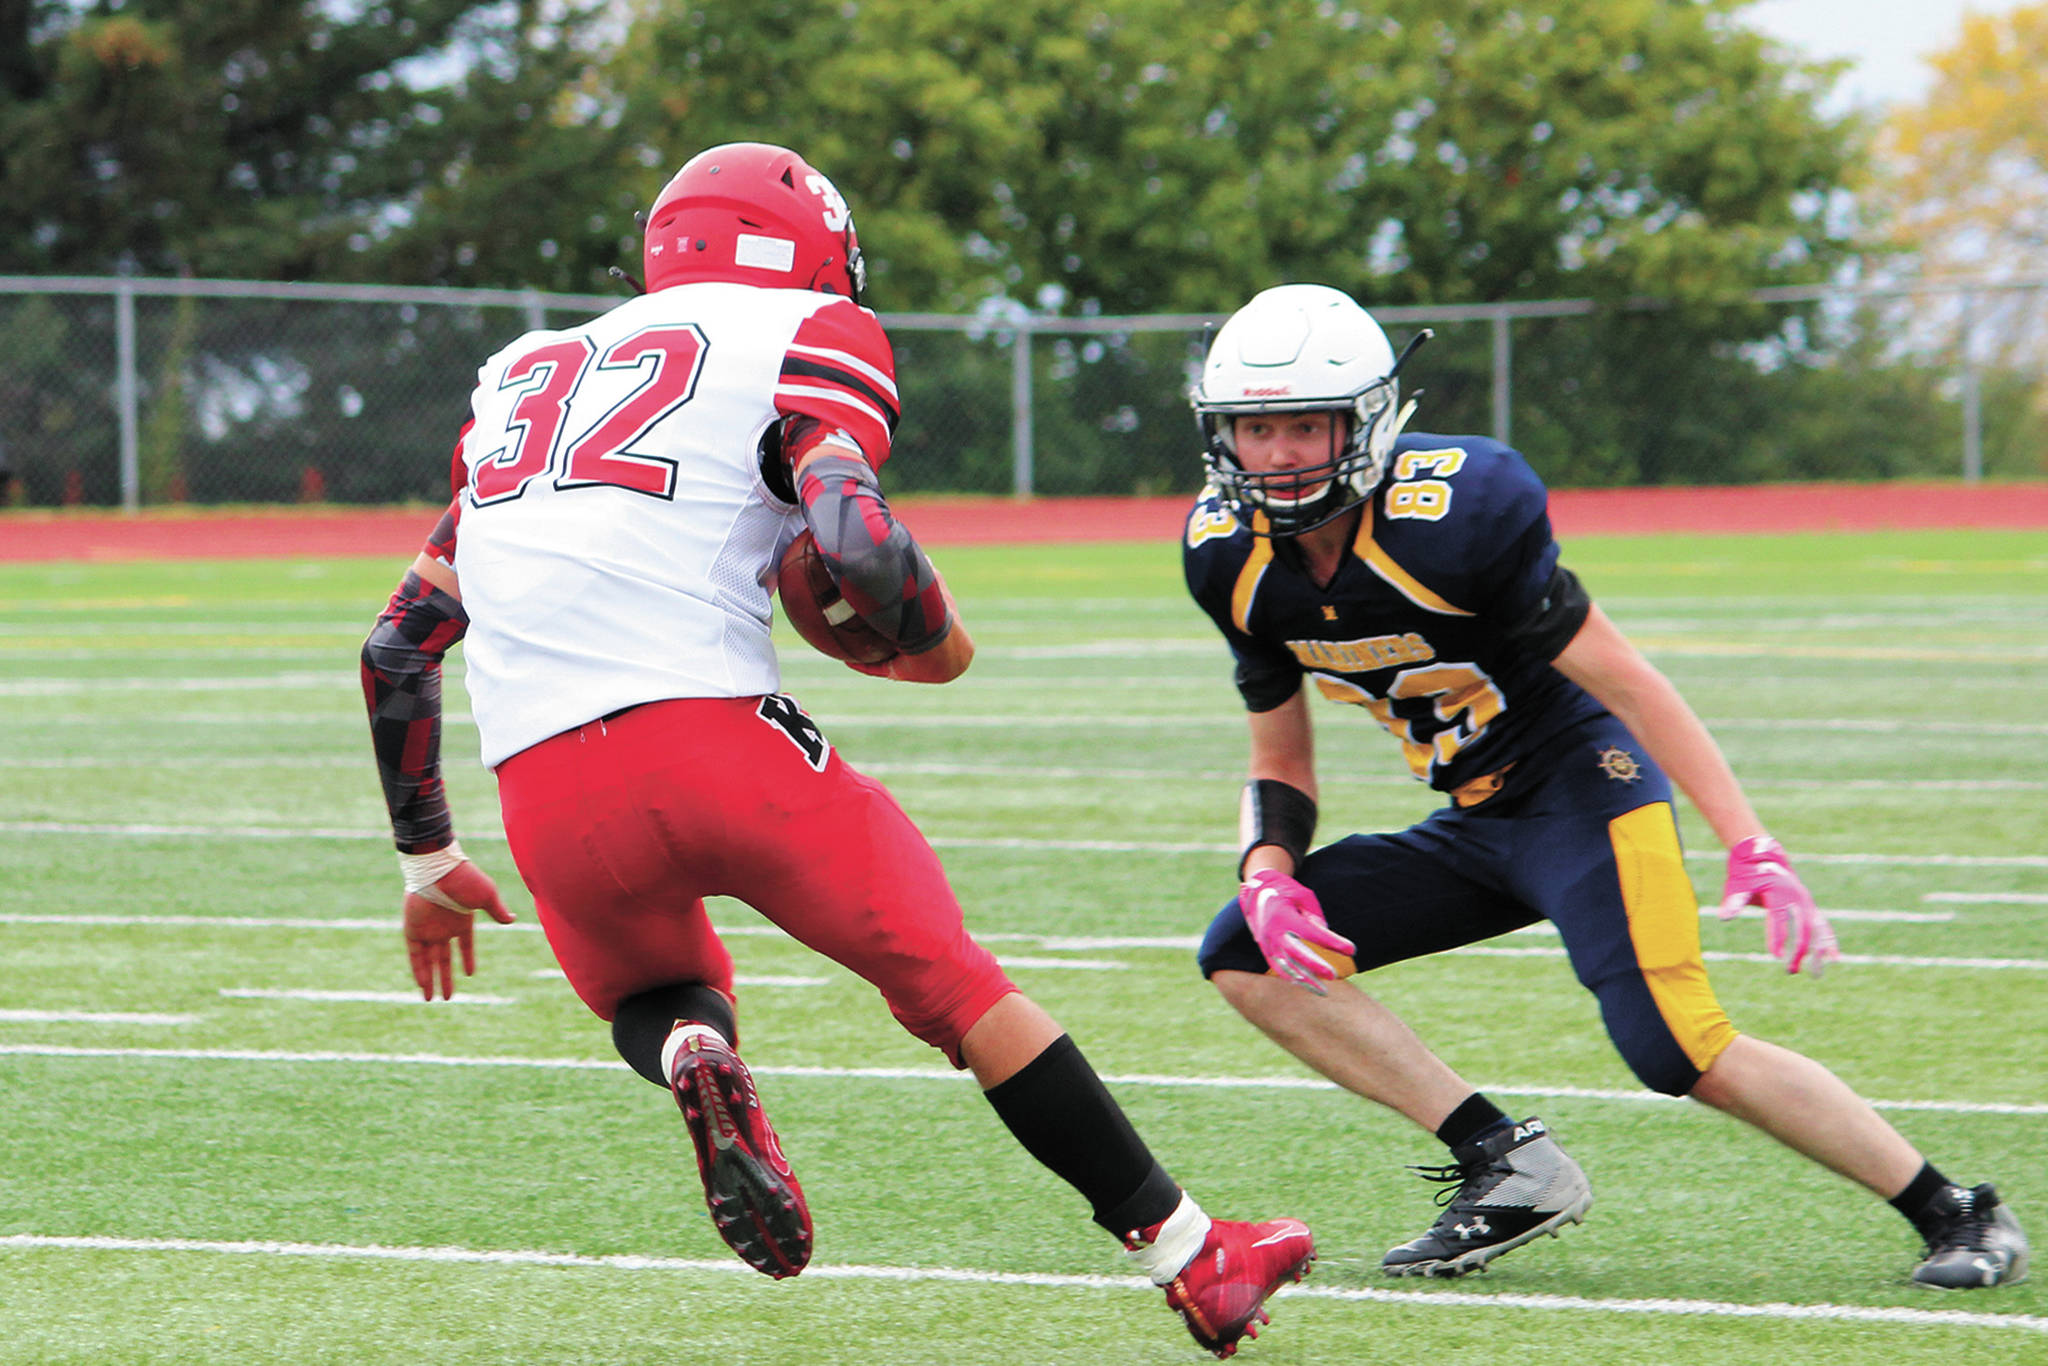 Kenai running back Tucker Vann looks to take the ball around Homer’s Markian Reutov during a Saturday, Sept. 19, 2020 football game at Homer High School in Homer, Alaska. The Mariners defeated the Kardinals 44-6. (Photo by Megan Pacer/Homer News)